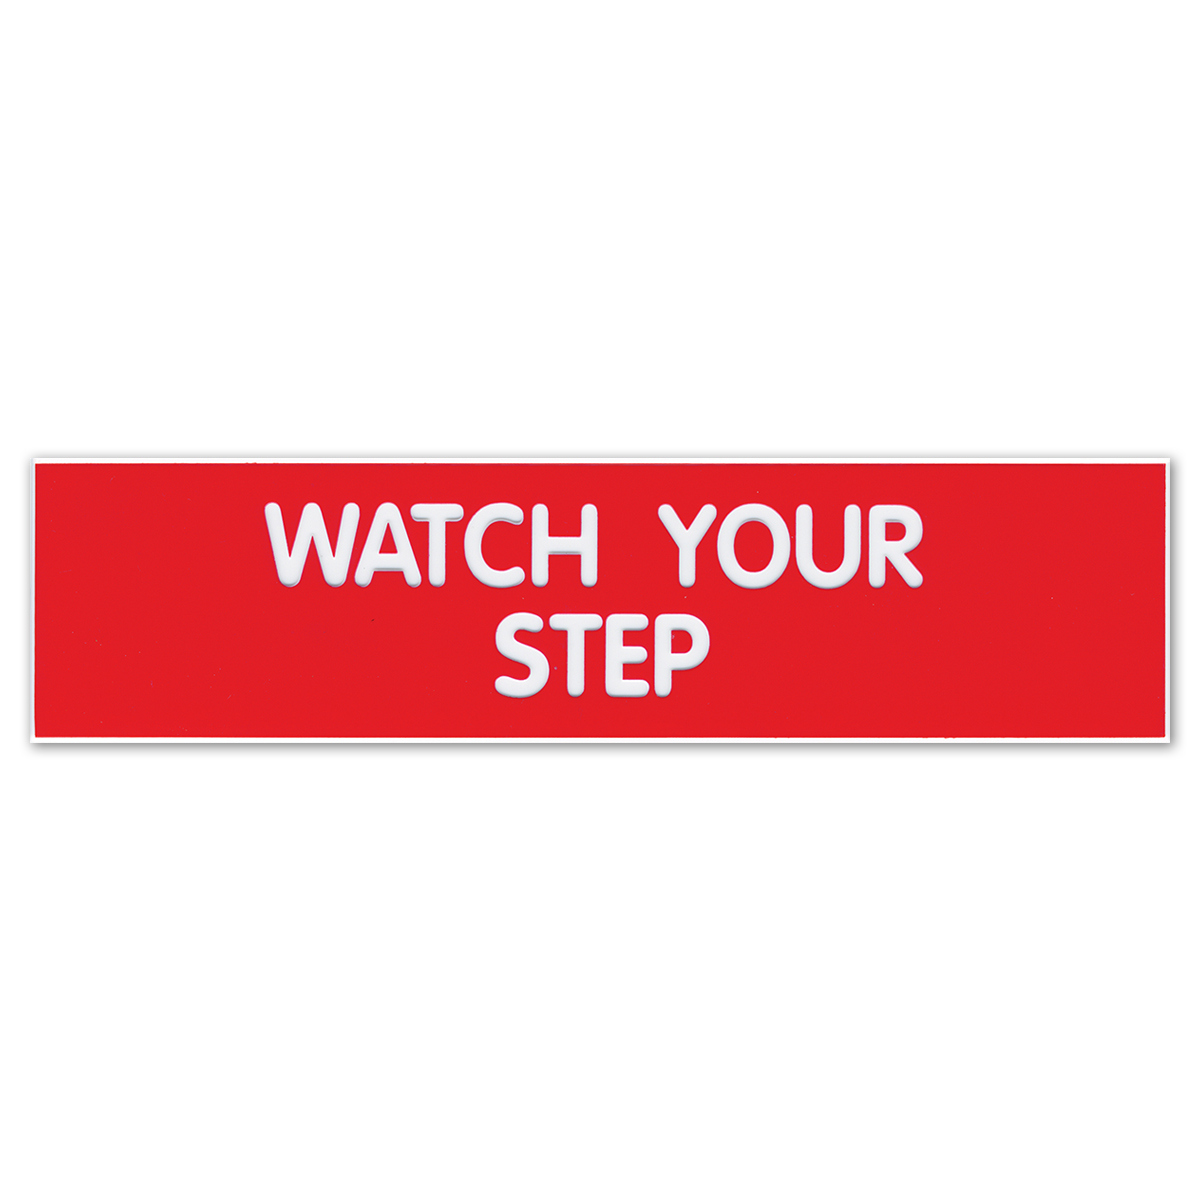 WATCH YOUR STEP - Plastic Sign - 098008